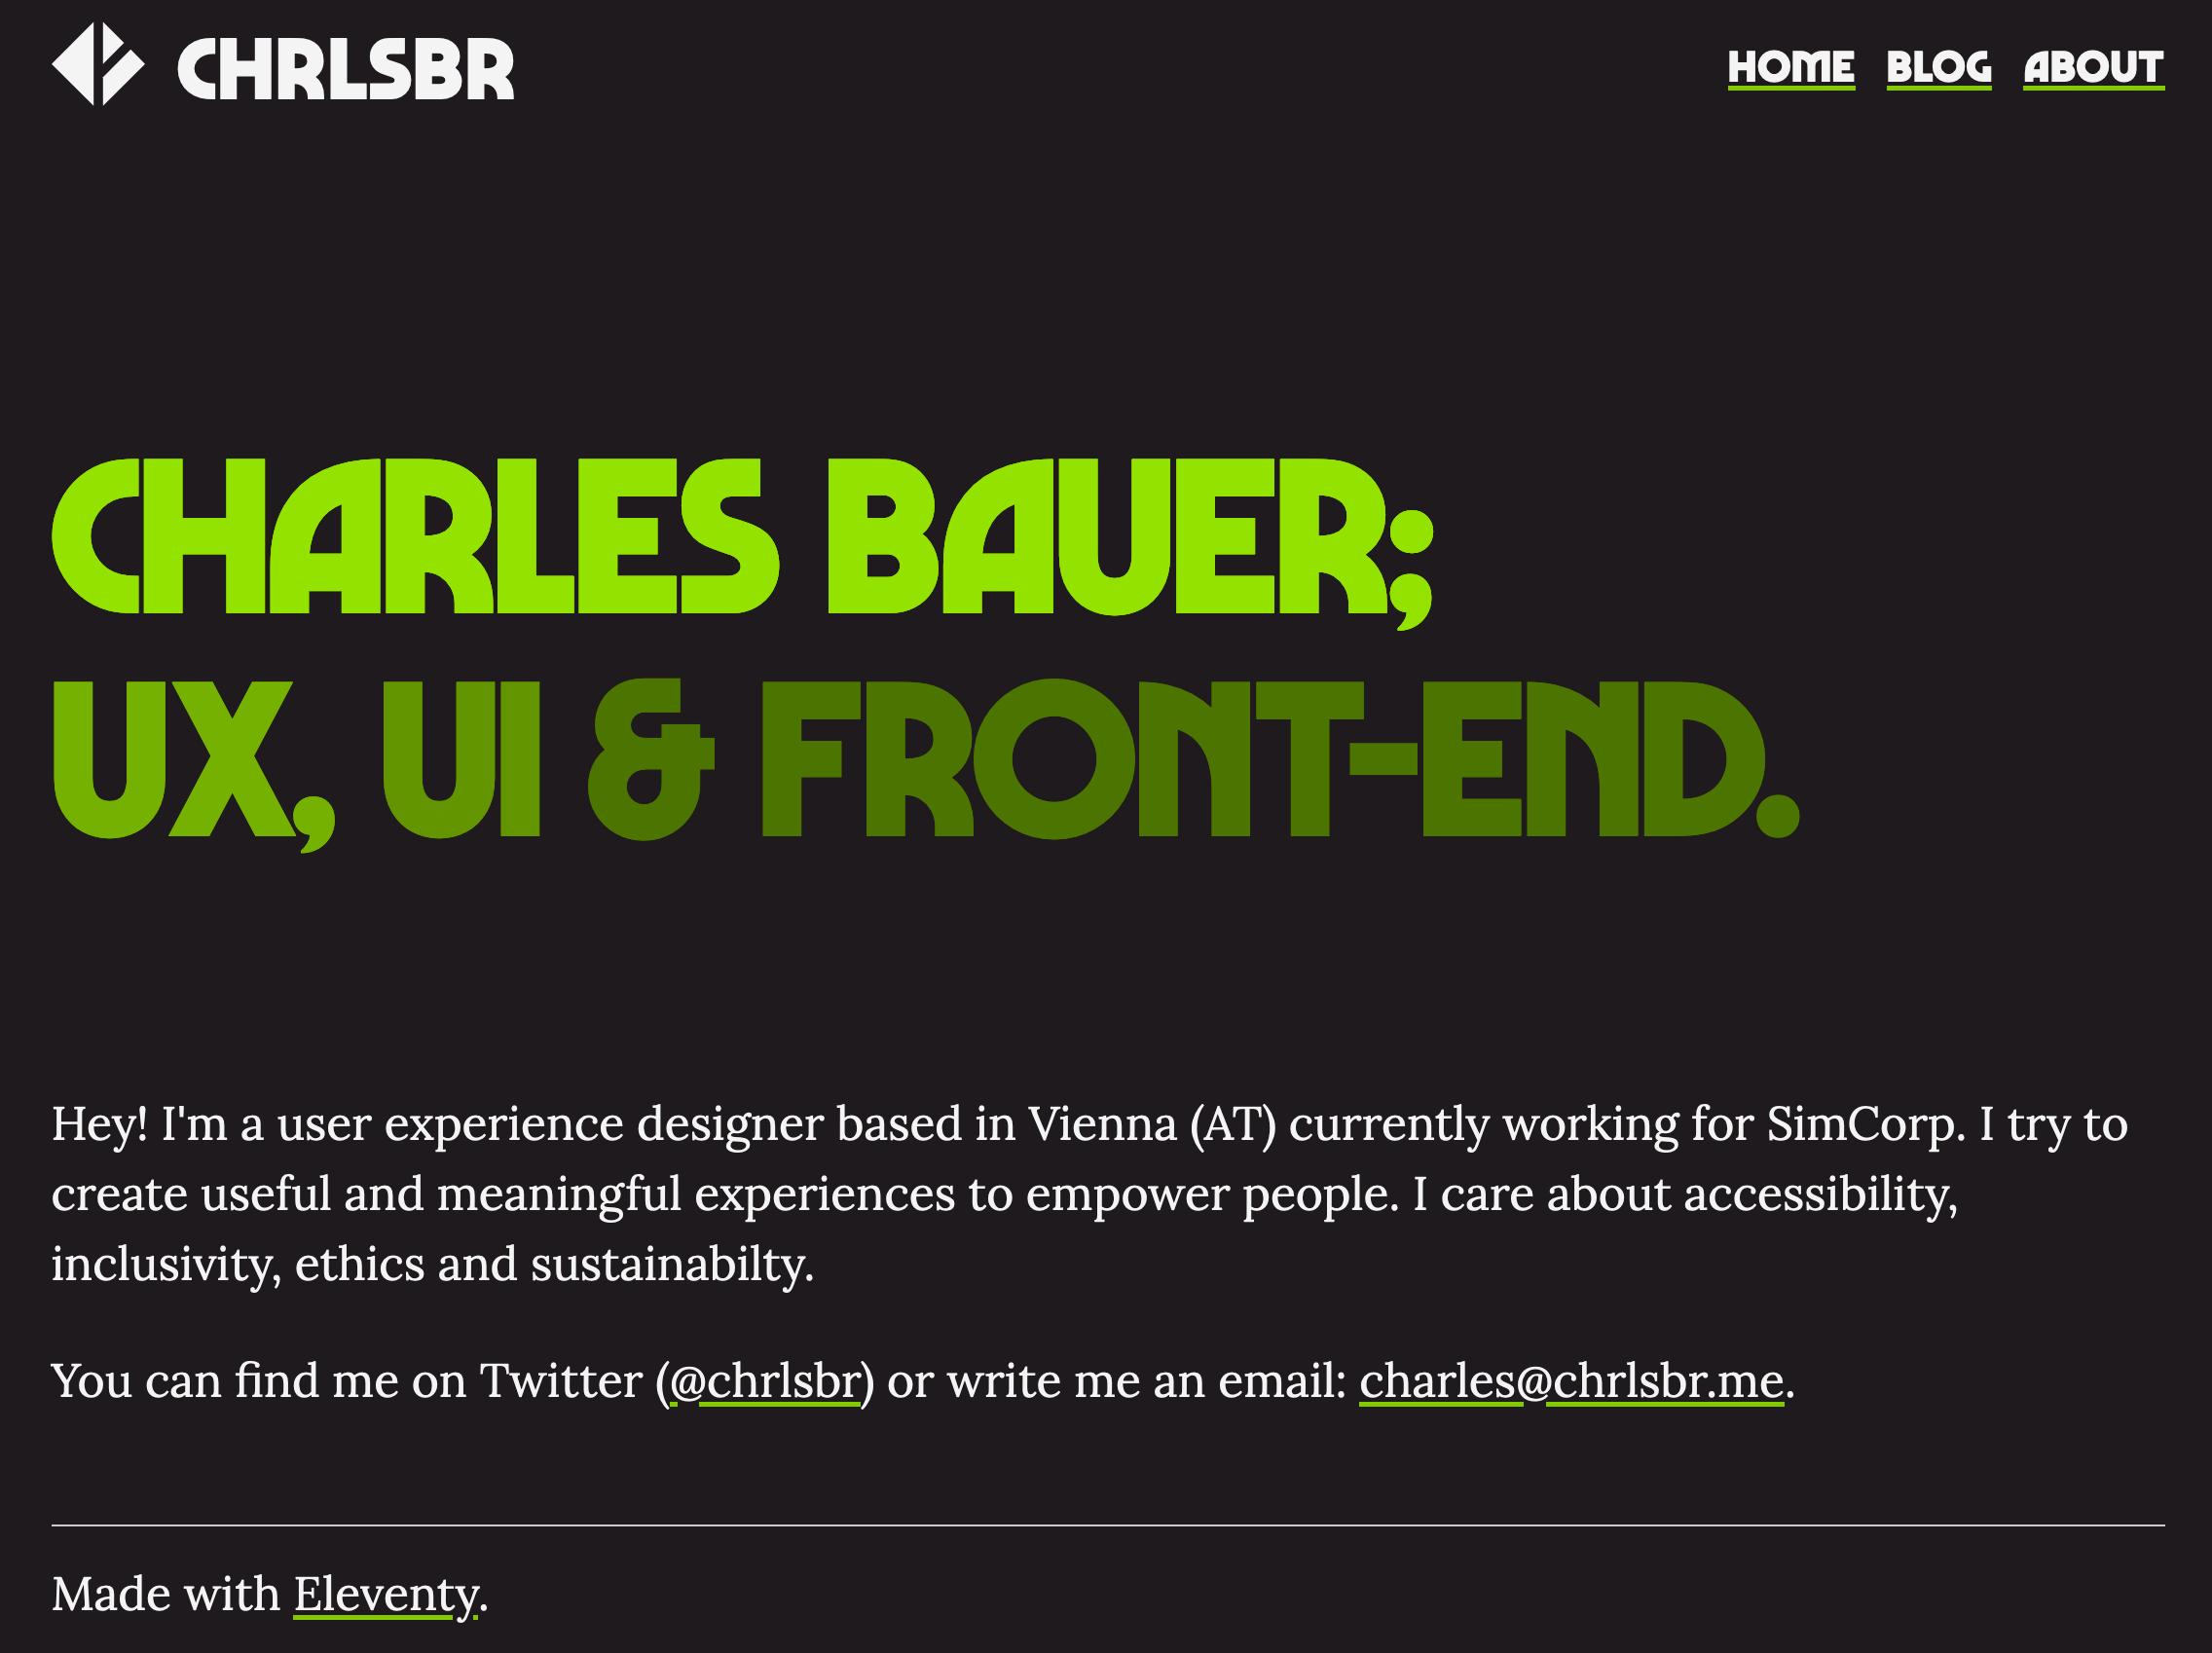 Web page with white text on a dark background, a big & bold green headline in the middle